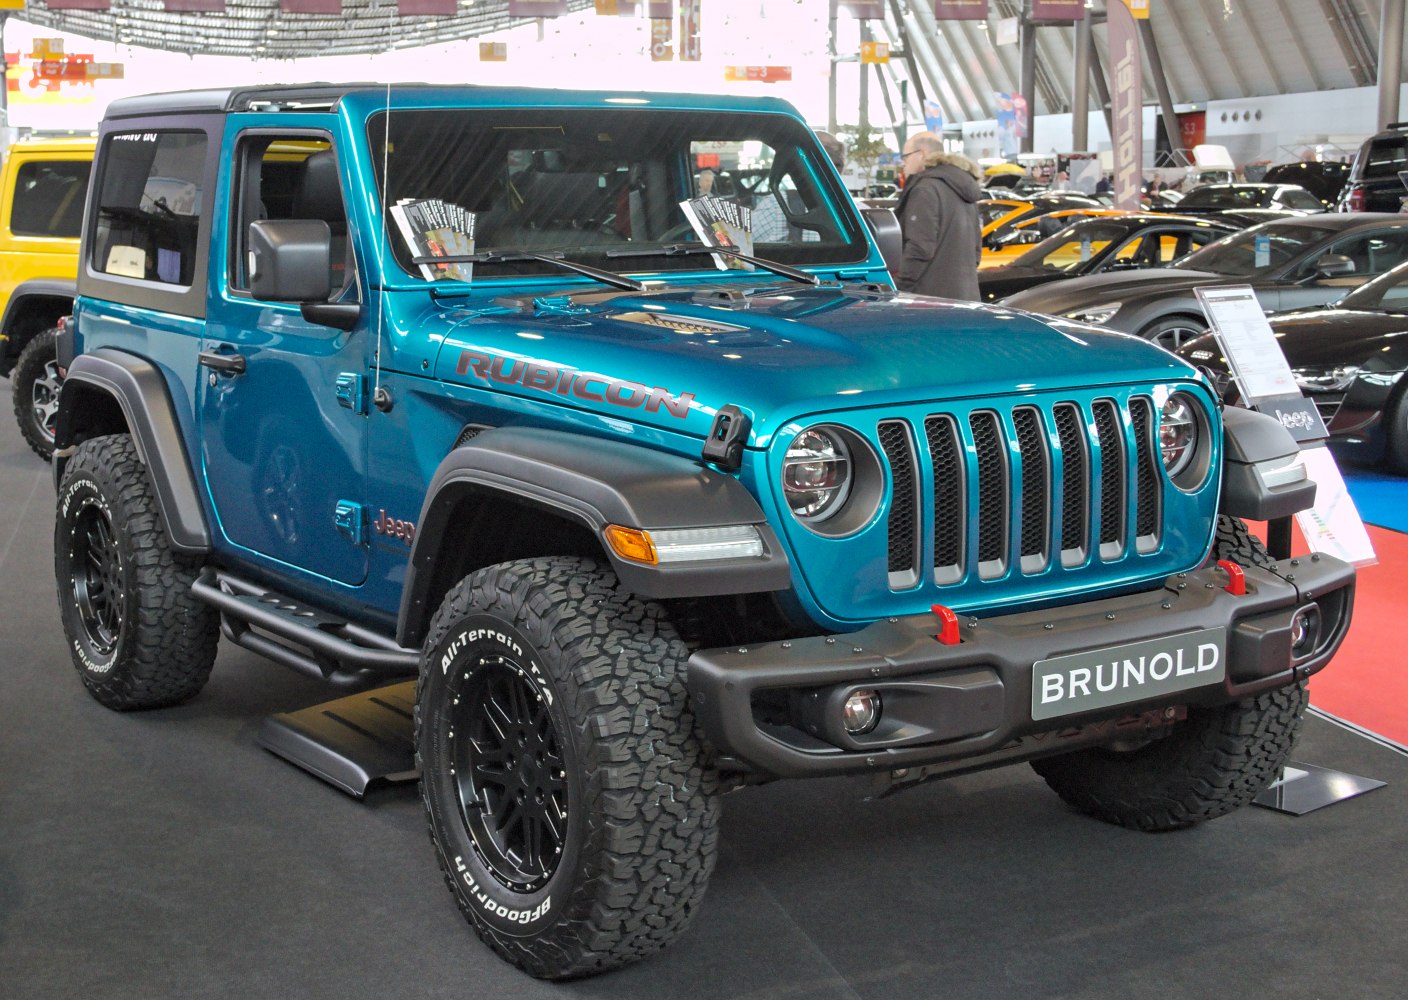 https://totalrenting.es/wp-content/uploads/2022/10/jeep-wrangler-iv-jl-2018-3-6-v6-rubicon-285-cv-4x4-automatic-todoterreno.png